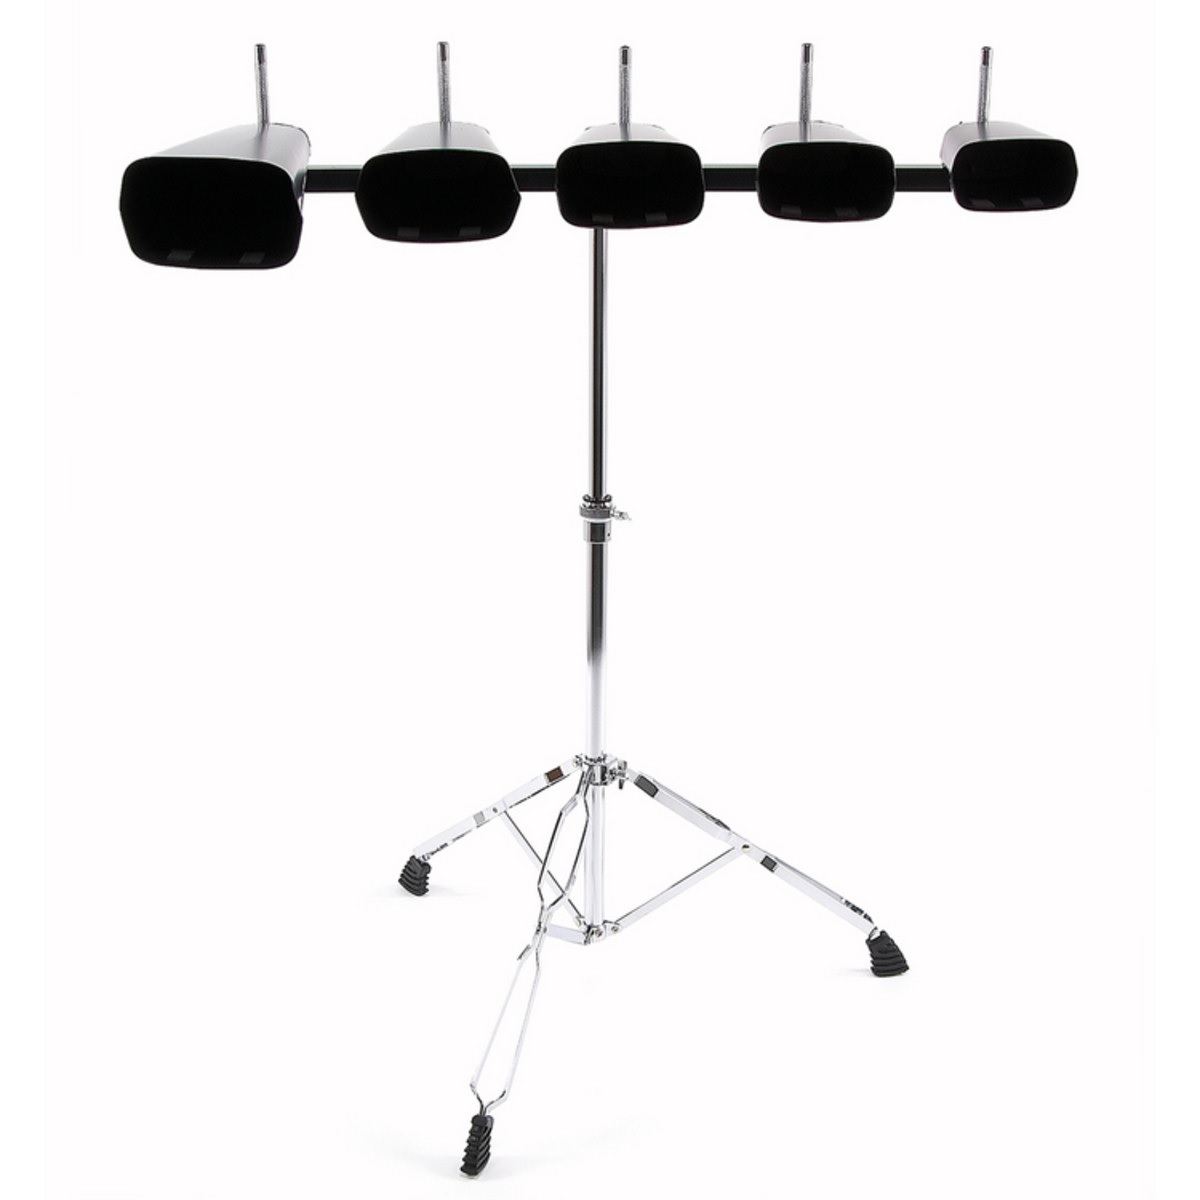 Set of 5 cowbell with doublefeet and adjustable heigh stand.